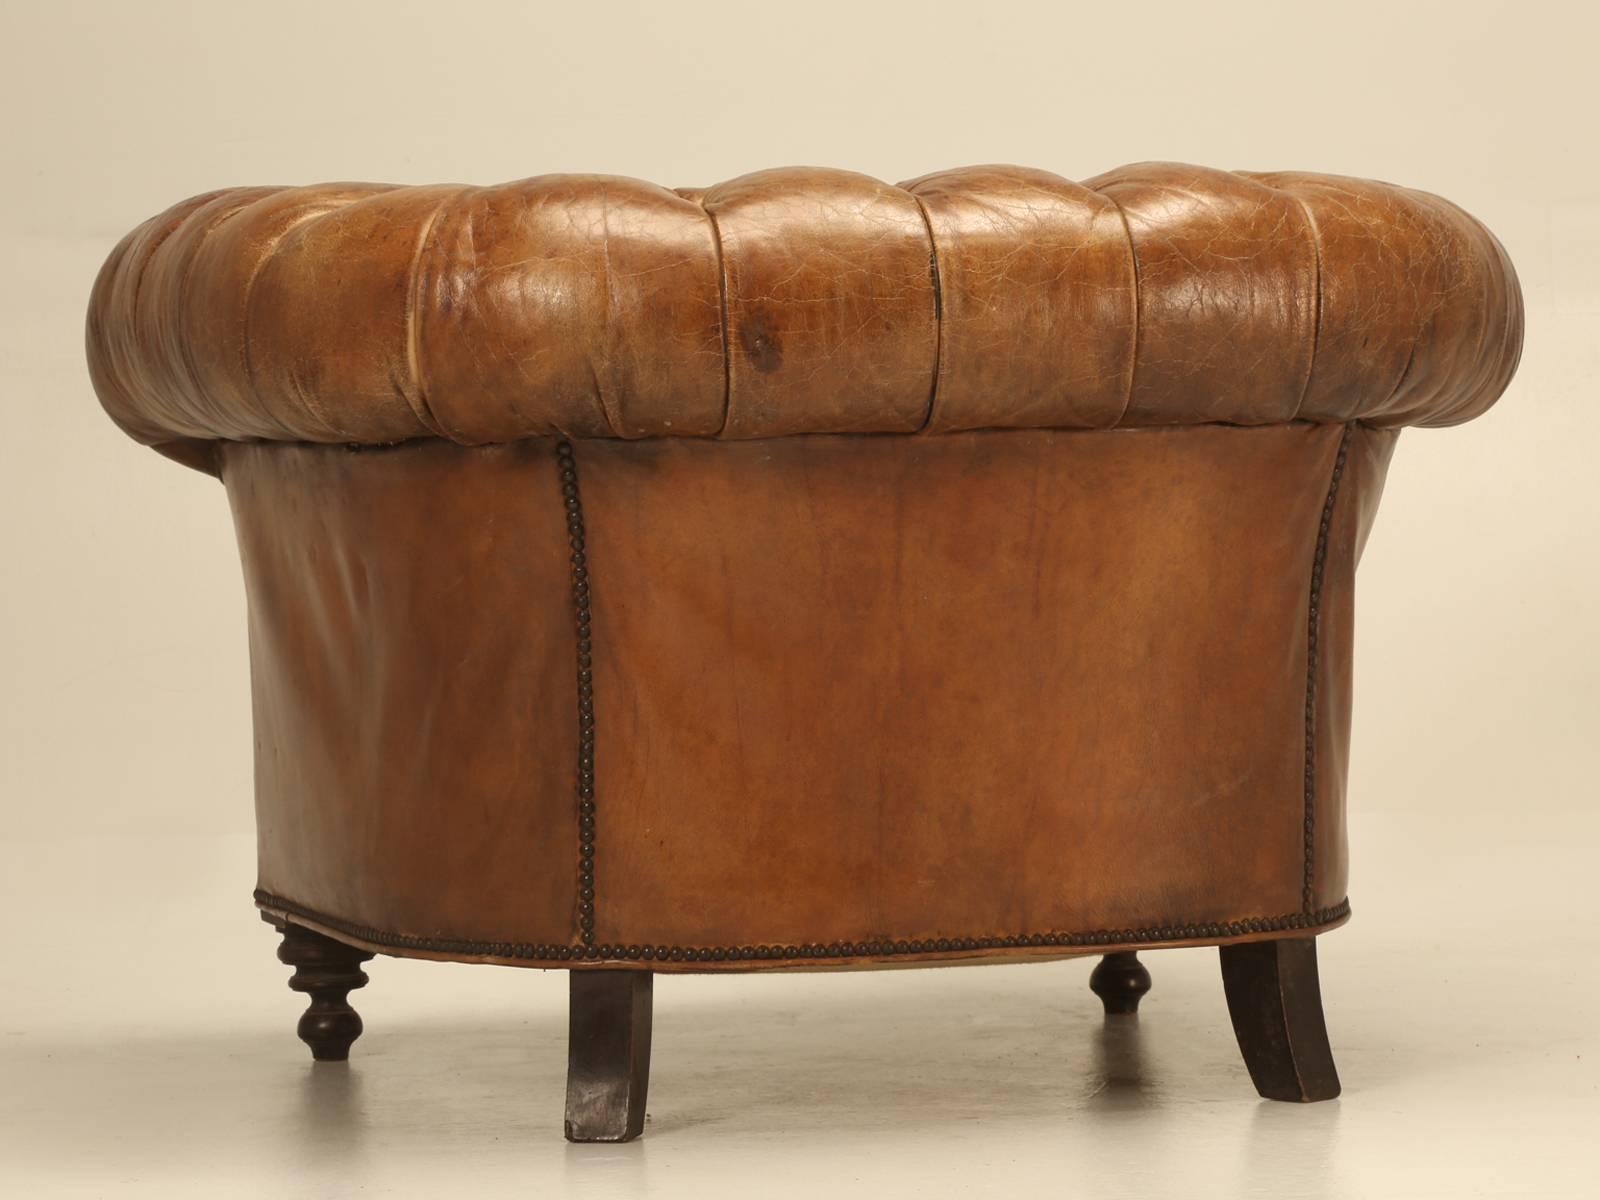 Late 19th Century Antique Chesterfield Chair in Original Leather and Horsehair Stuffing circa 1900